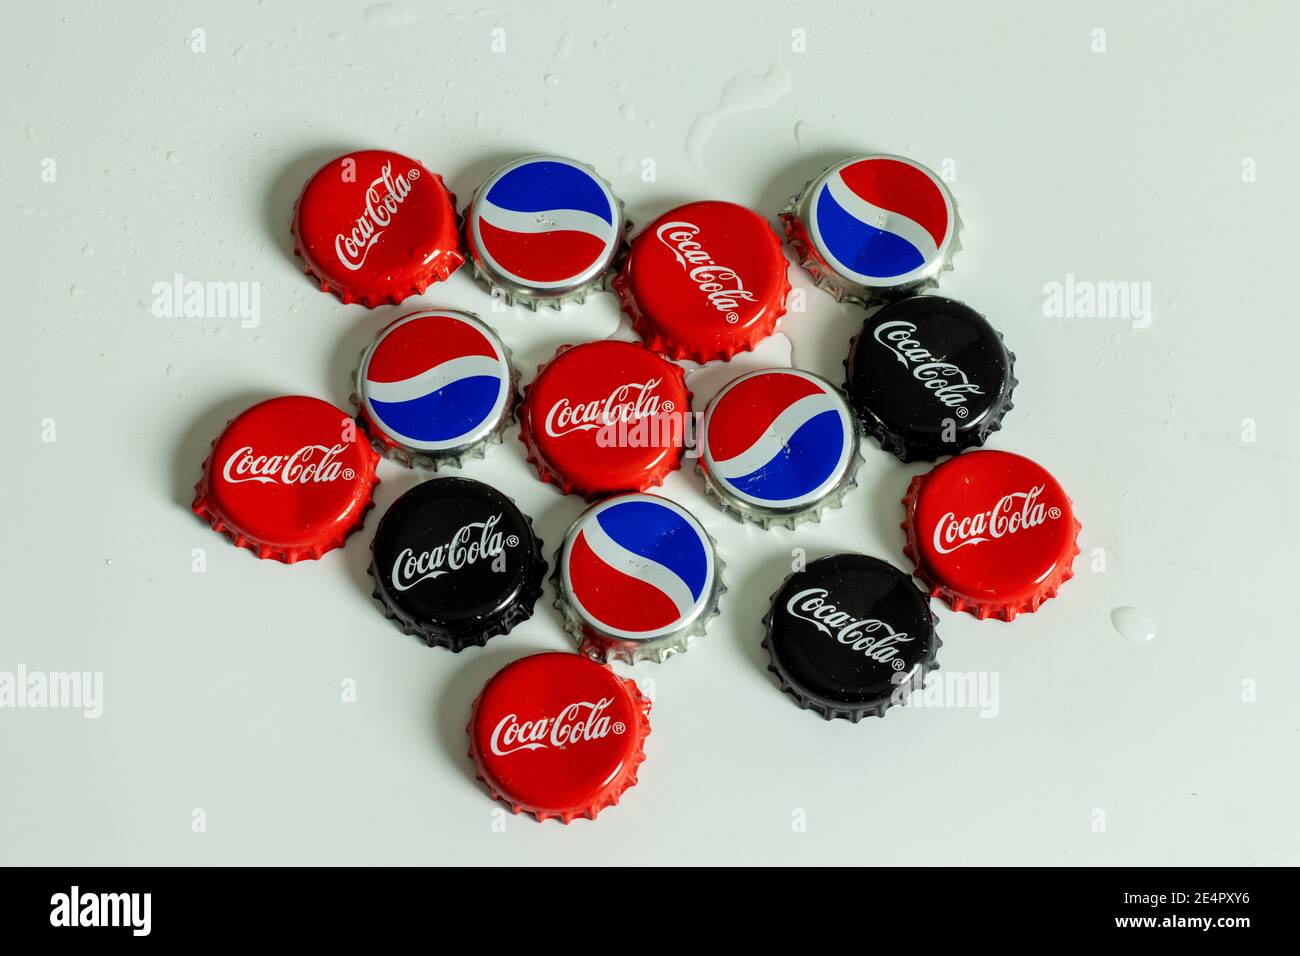 New York, USA - 1 January 2021: Top view of Pepsi and Coca-Cola bottle cap with logo. Coke brand, Illustrative Editorial Stock Photo